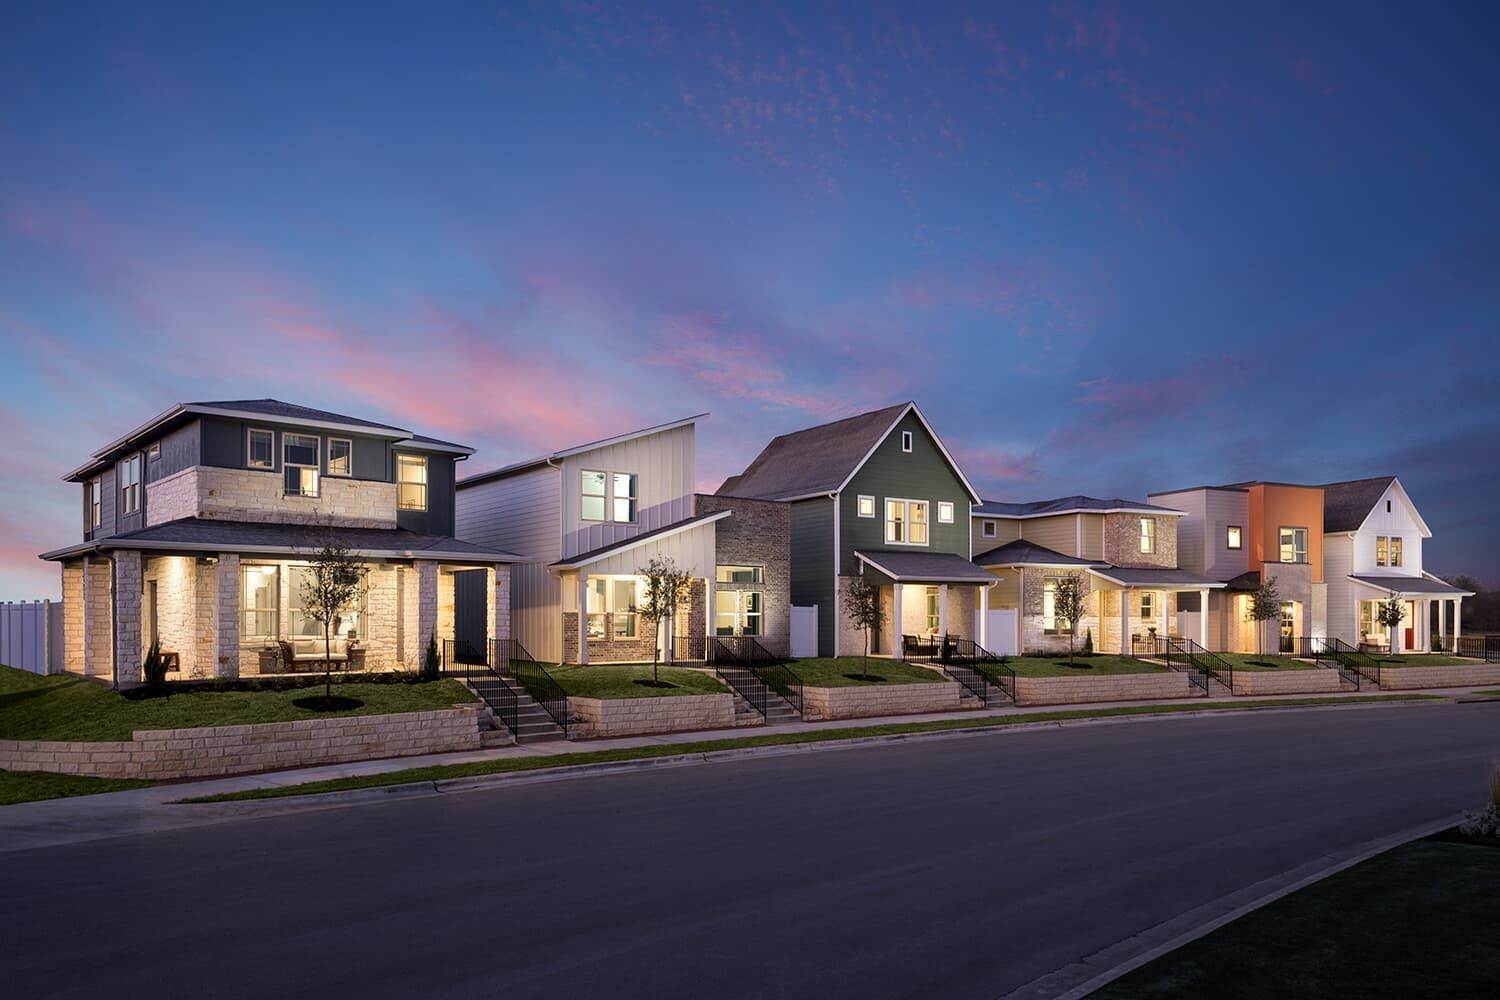 2. Urban Homes Collection at Easton Park building at 7708 Skytree Drive, Southeast Austin, Austin, TX 78744